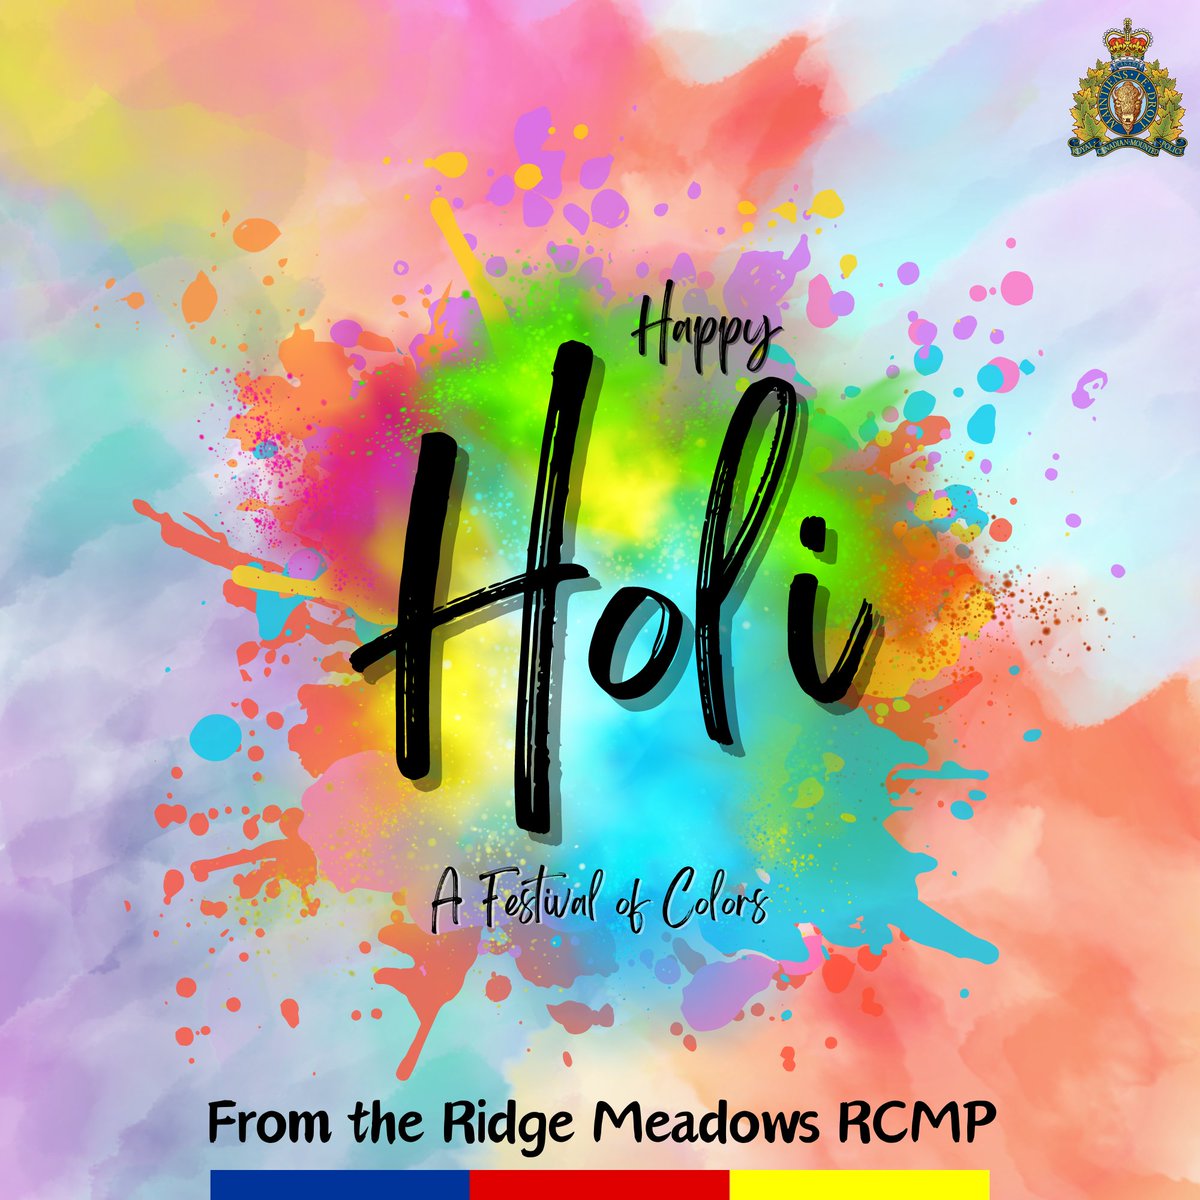 Wishing all who celebrate a very happy and colourful #Holi!